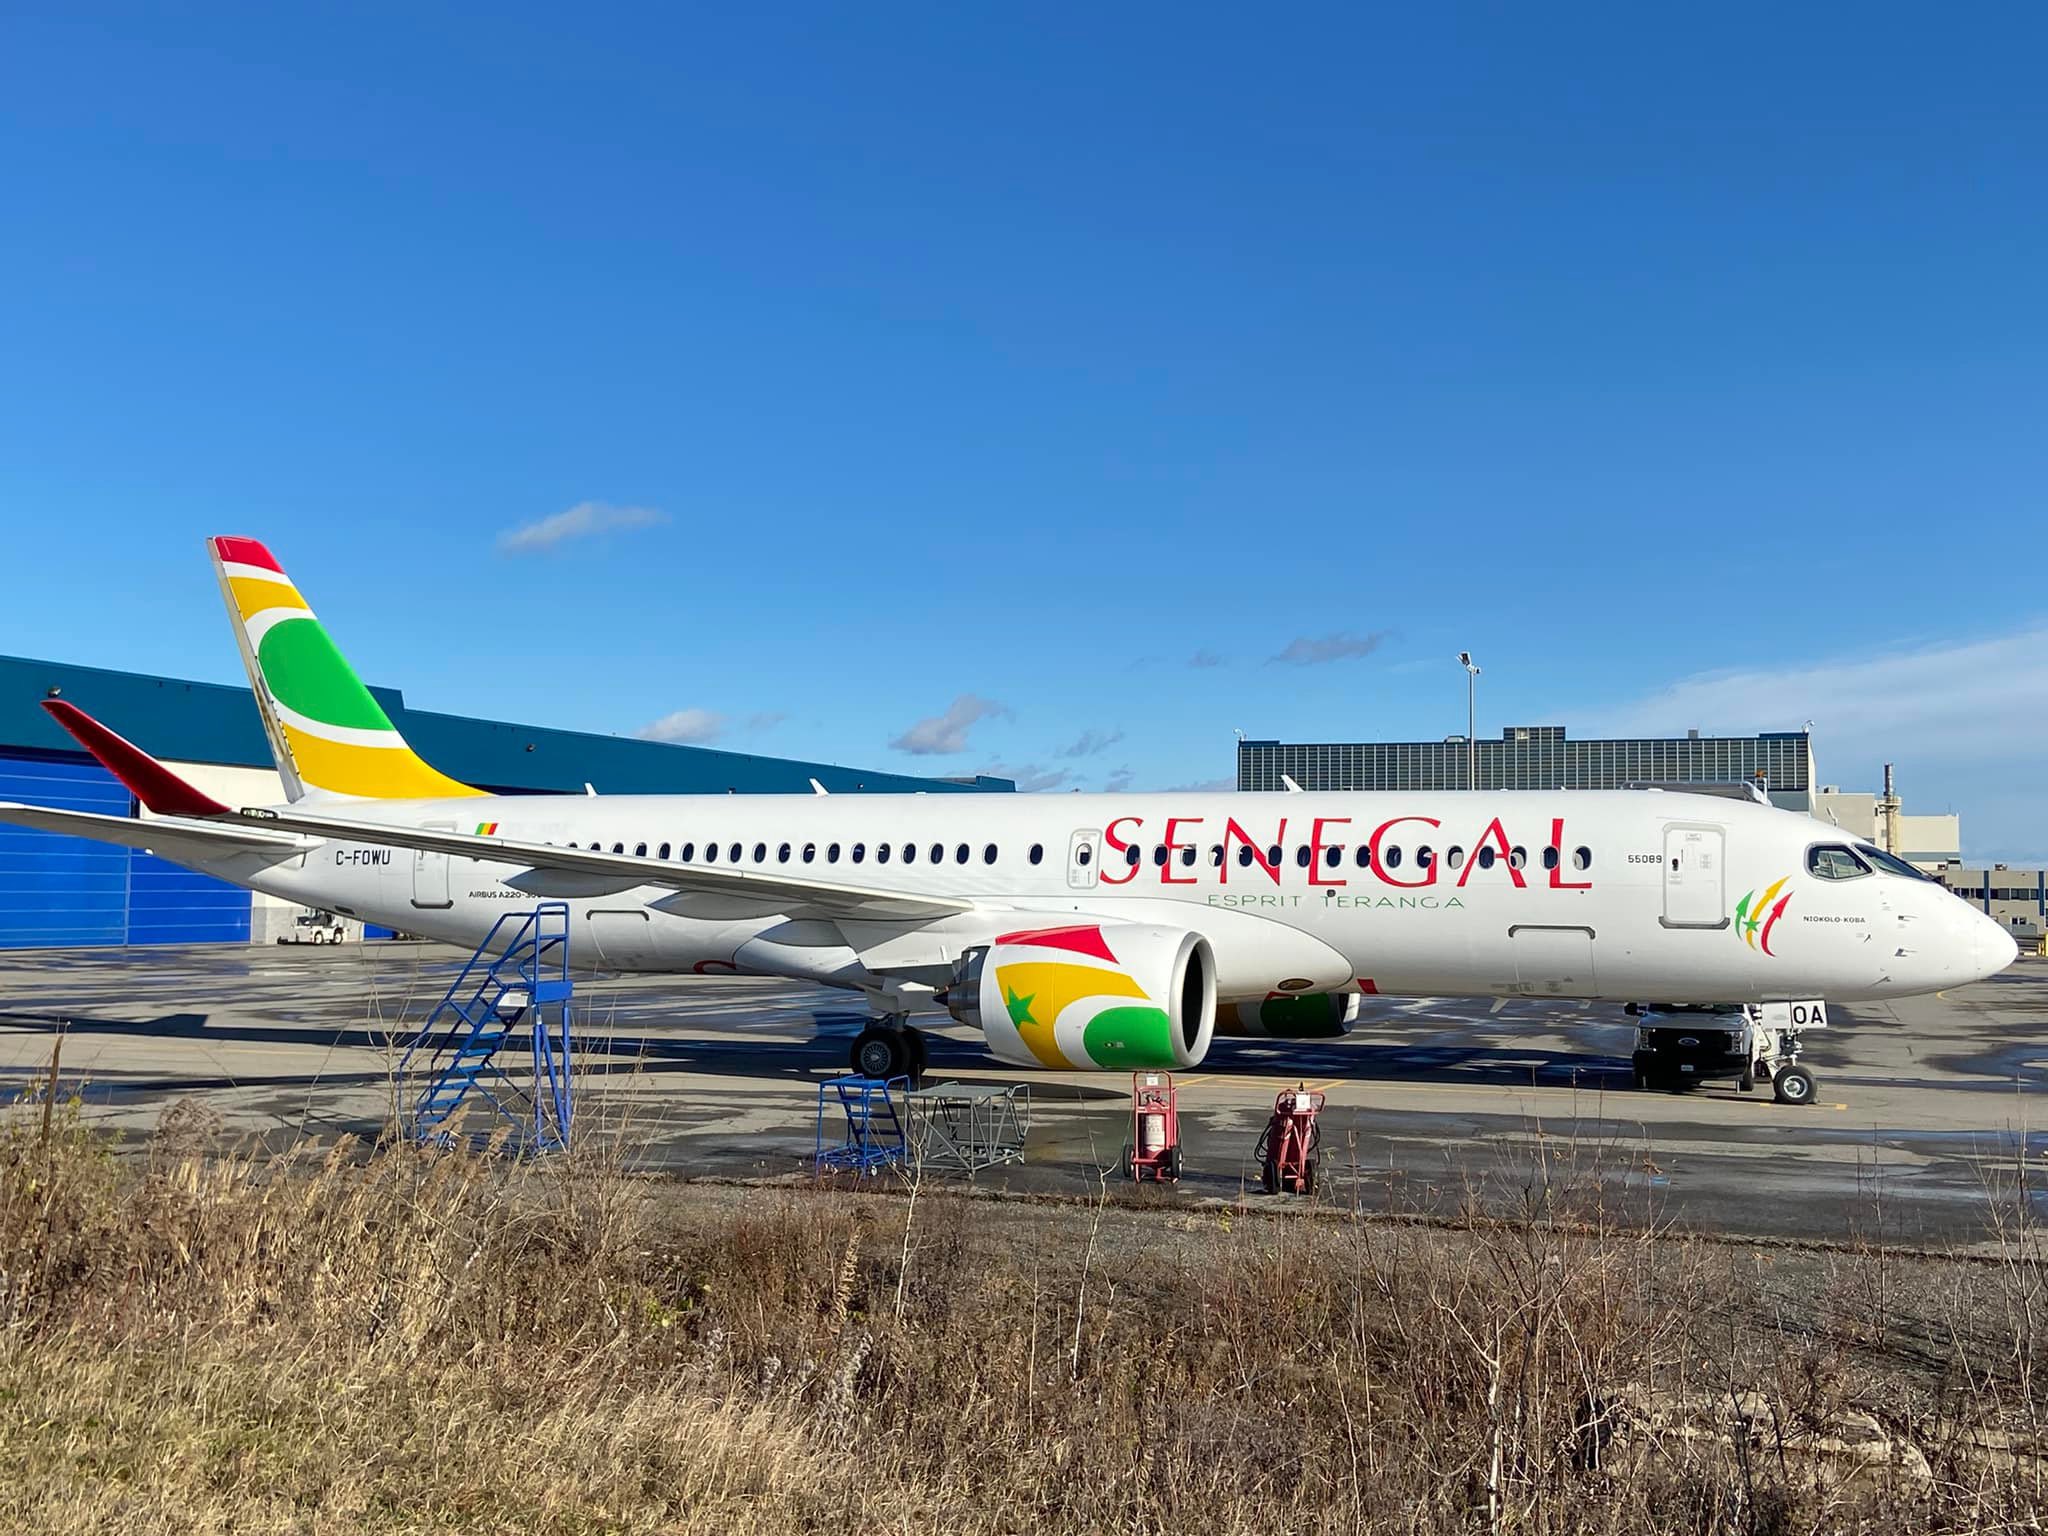 Air Senegal will file a lawsuit against engine manufacturer Pratt & Whitney for the financial loss Due To PW1524G-3 engines.